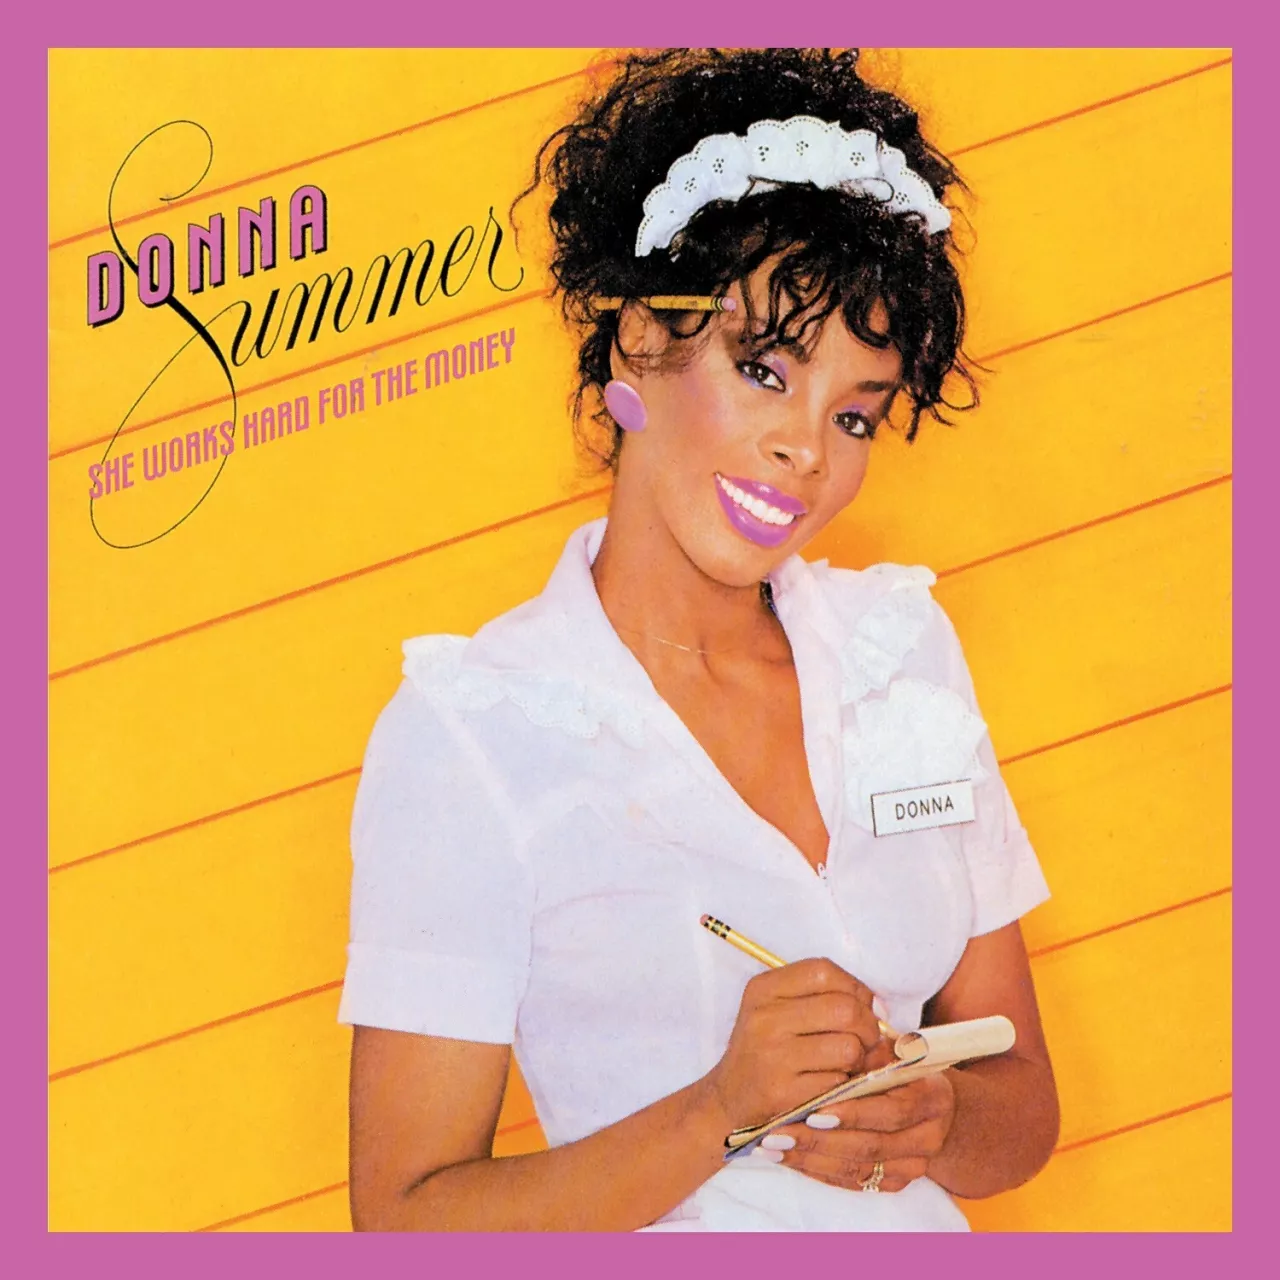 DONNA SUMMER’S SHE WORKS HARD FOR THE MONEY IS CELEBRATED WITH EXPANDED, DIGITAL-ONLY 40TH ANNIVERSARY DELUXE EDITION – AVAILABLE NOW. New Additions to the Iconic Pop/R&B/Soul Artist’s Chart-Busting 1983 Solo Album Include 4 Bonus Tracks Making Their Digital Debut. img#1